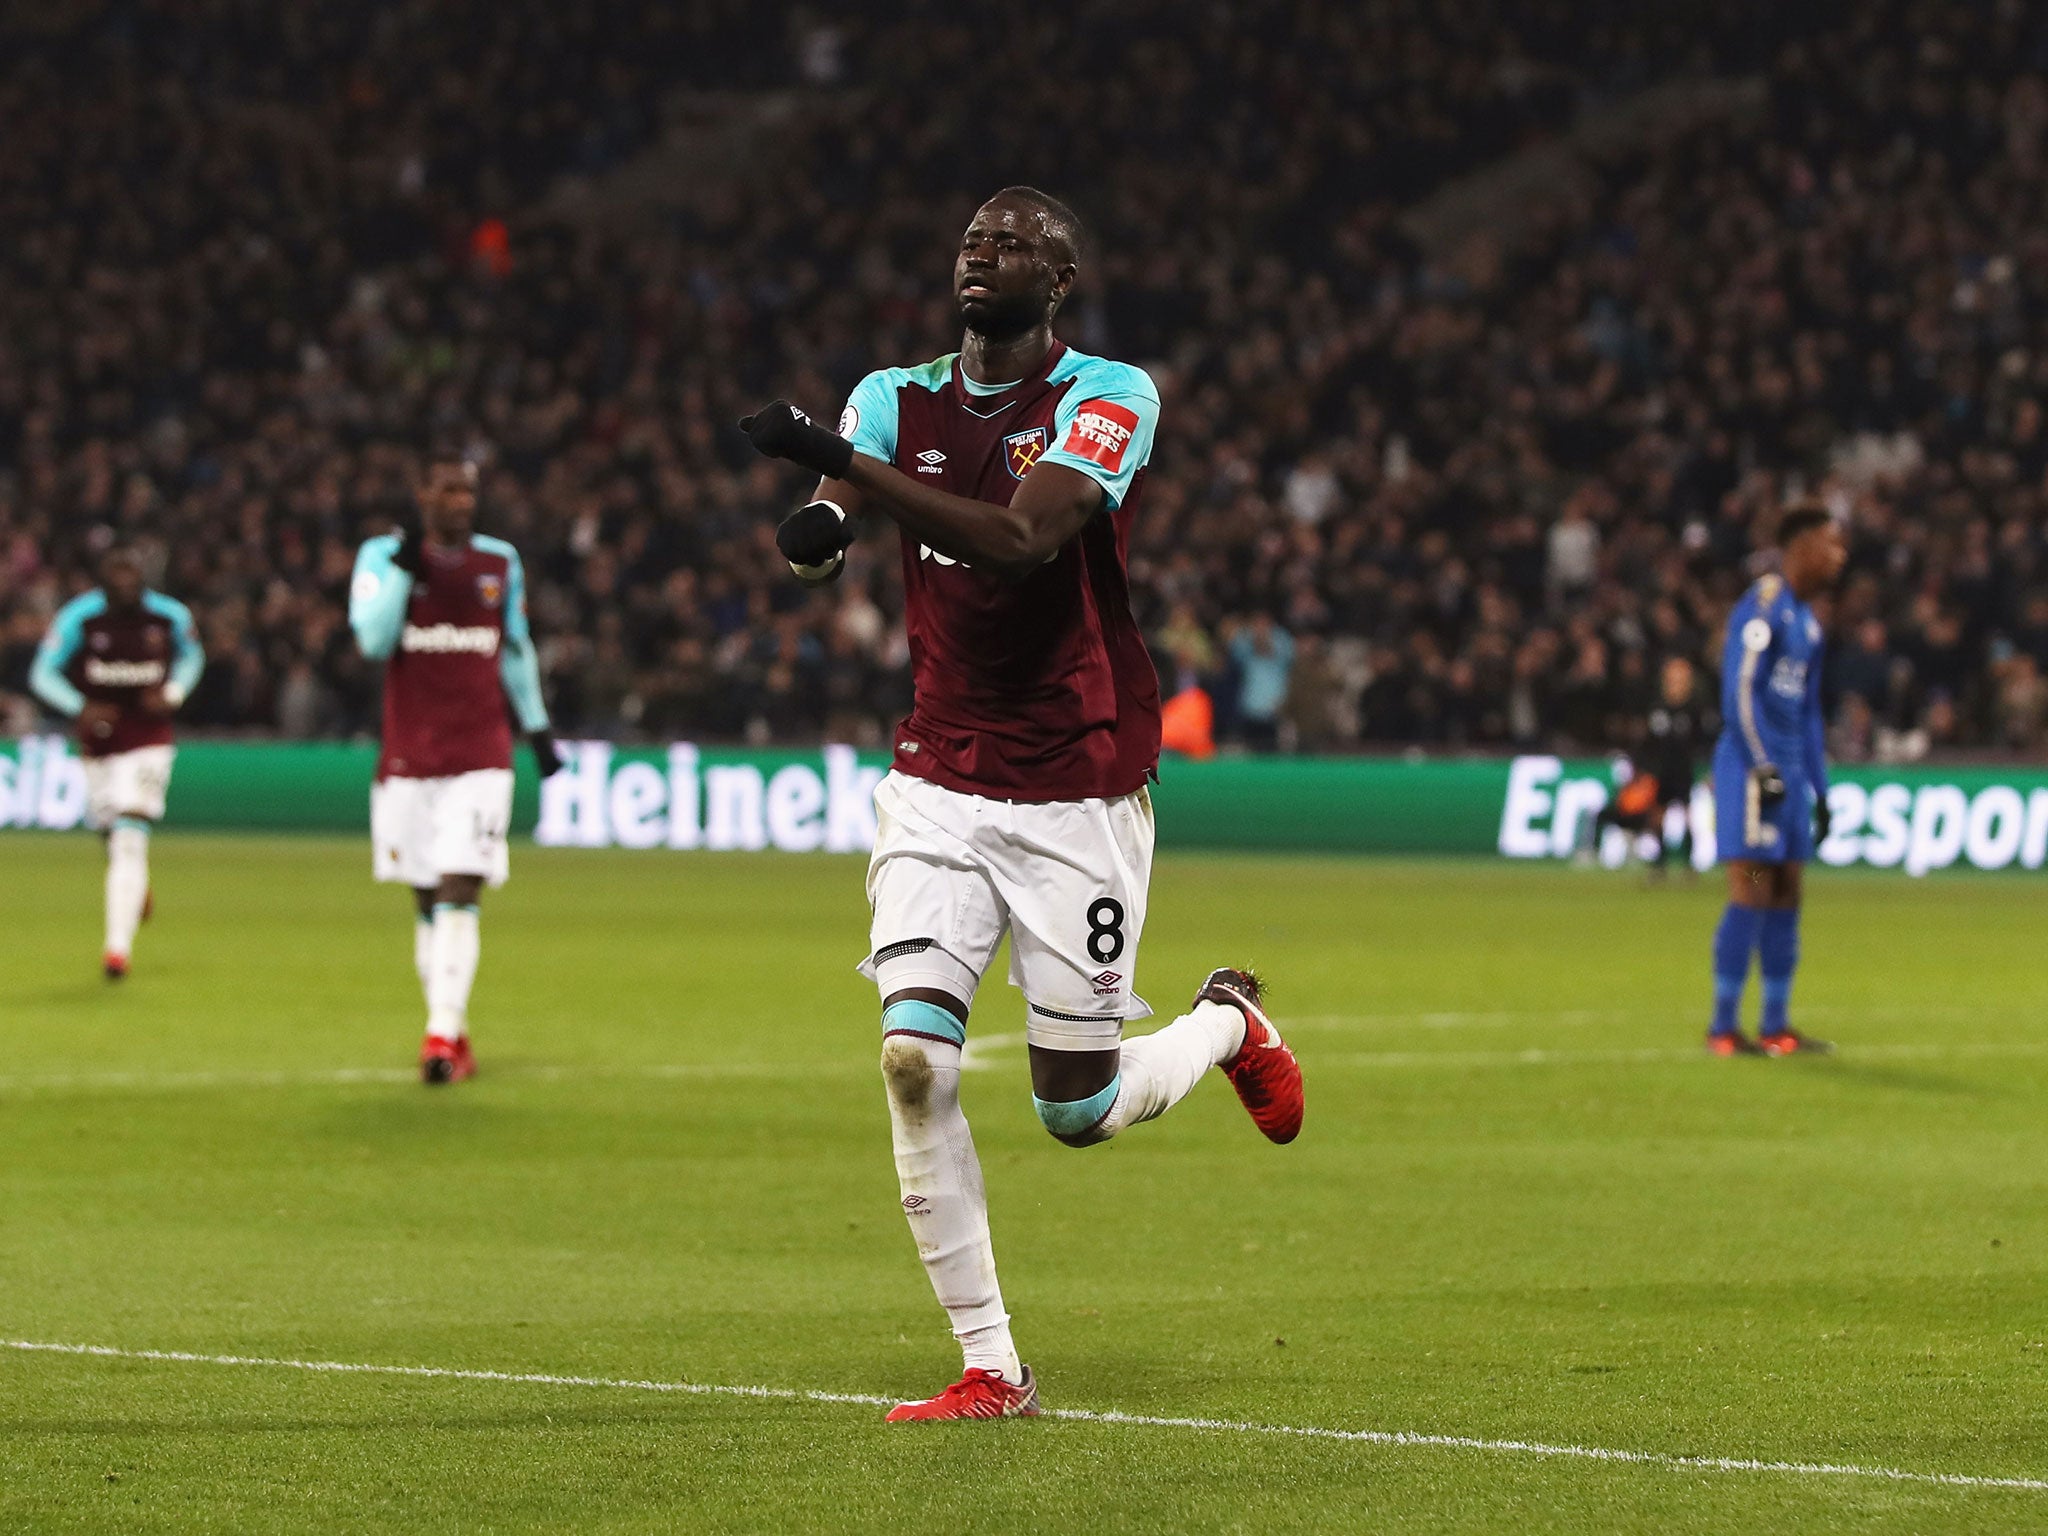 Cheikhou Kouyate struck on the brink of half-time to draw the Hammers level with Leicester